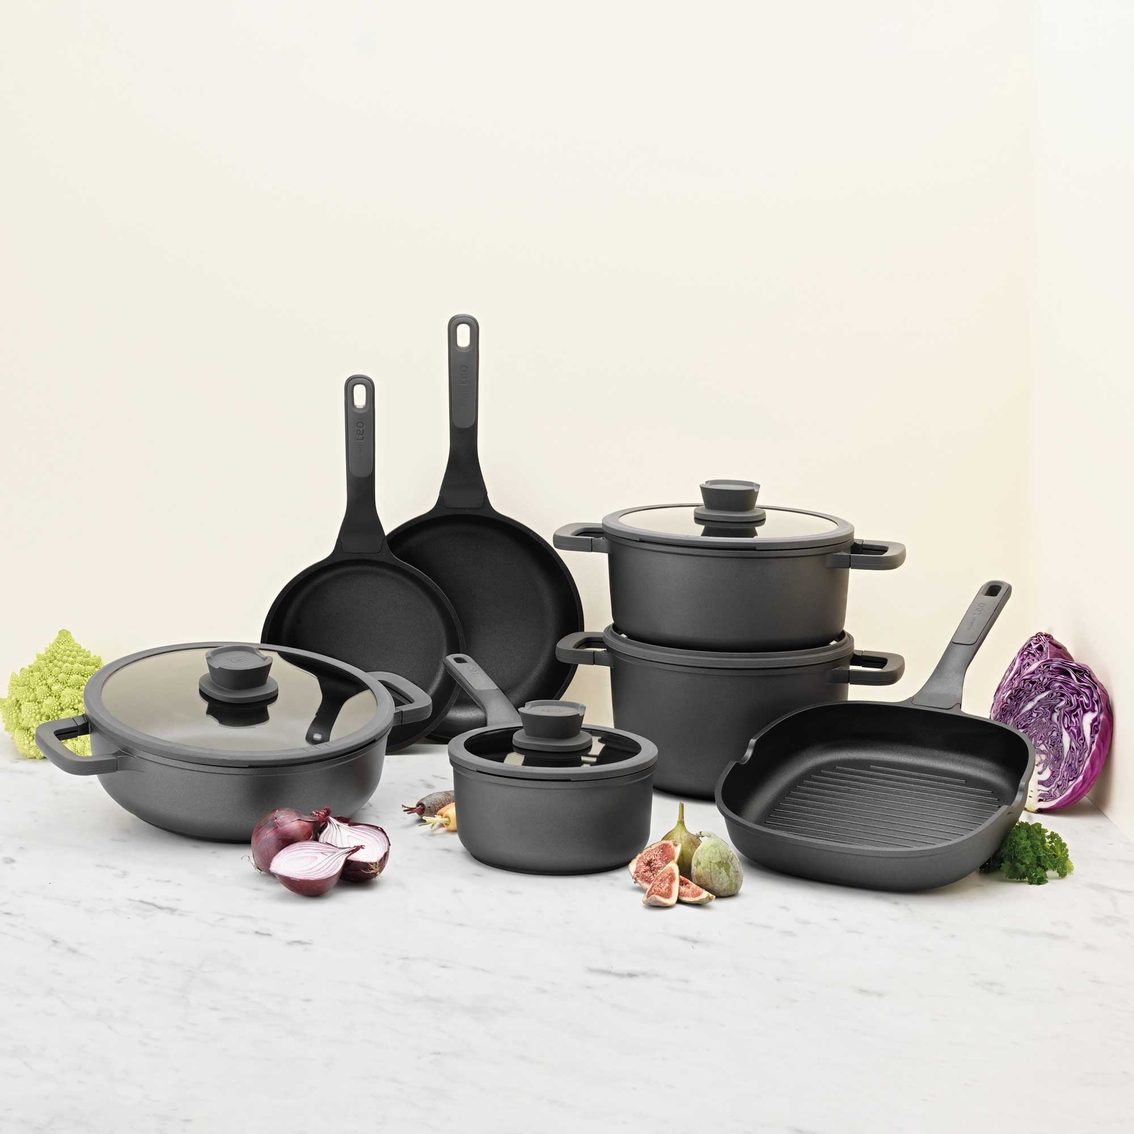 Berghoff Leo Stone Cookware Set 11 Pc., Cookware Sets, Household